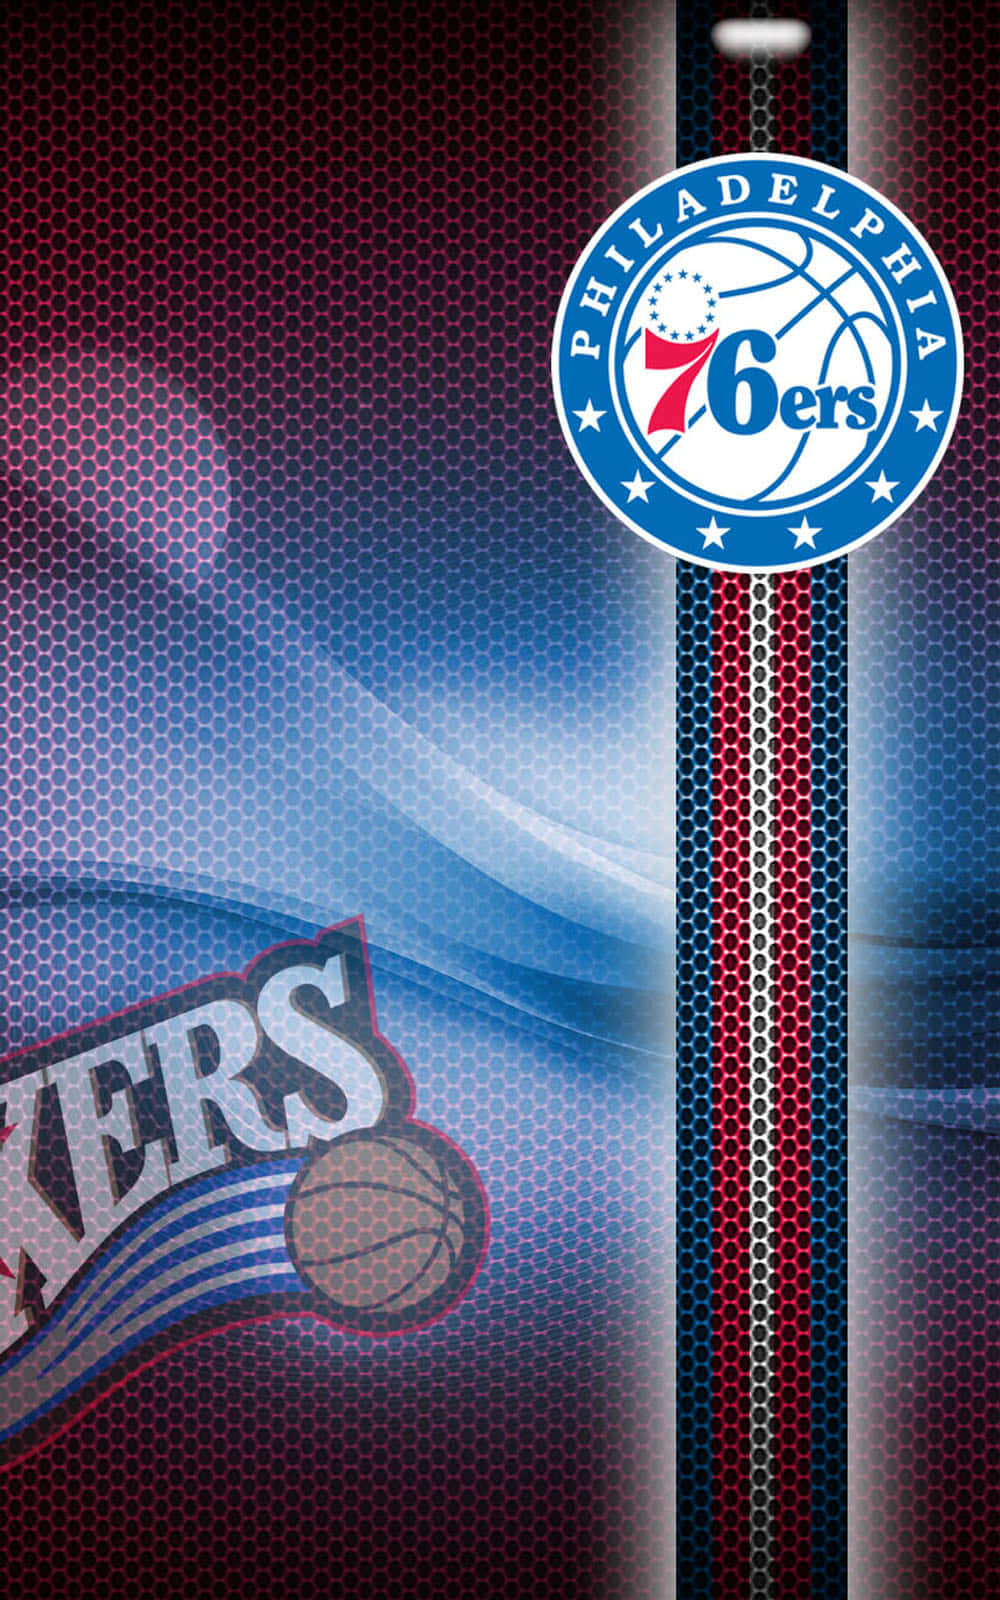 Celebrate the Philadelphia 76ers with this unique team-themed iPhone Wallpaper